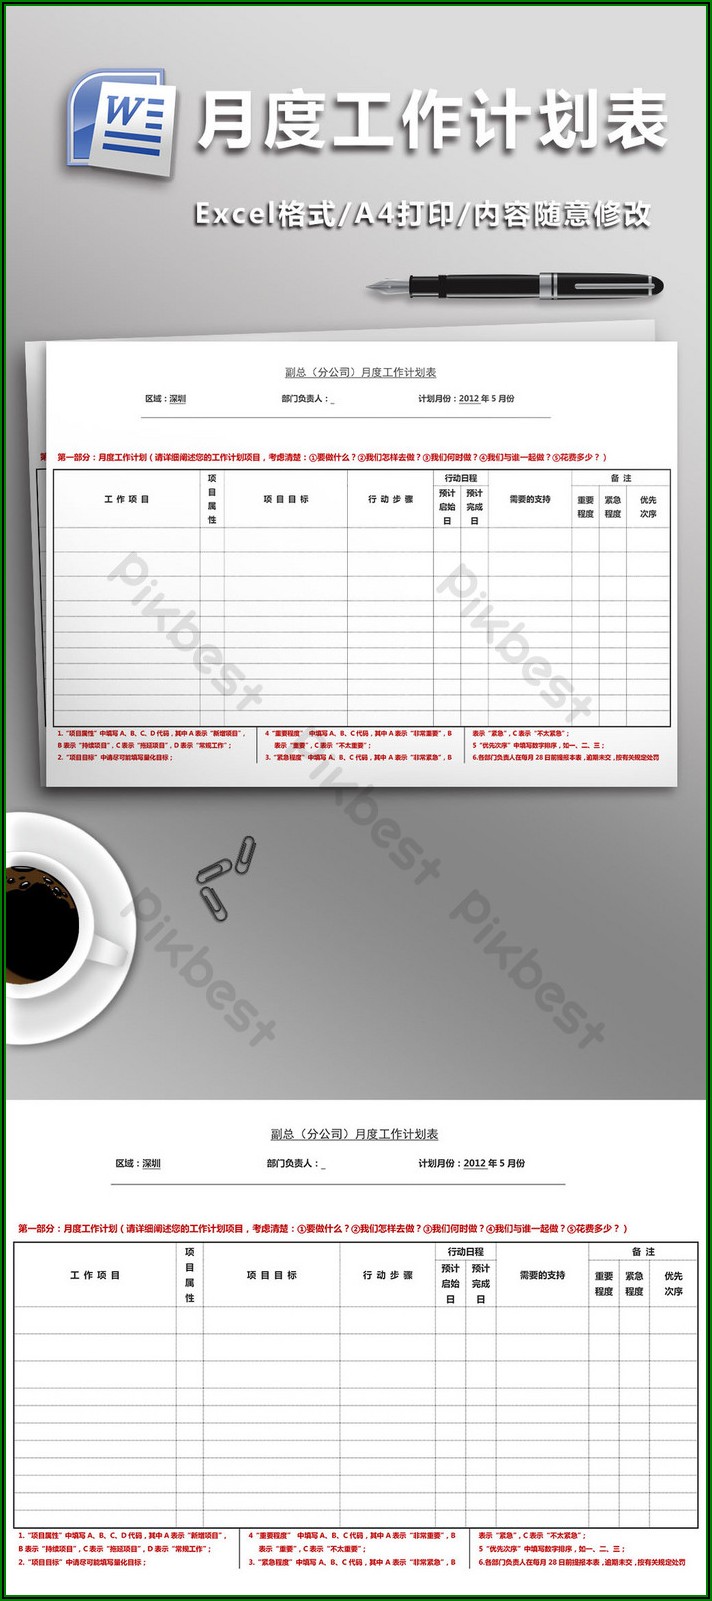 Monthly Work Schedule Template Free Download